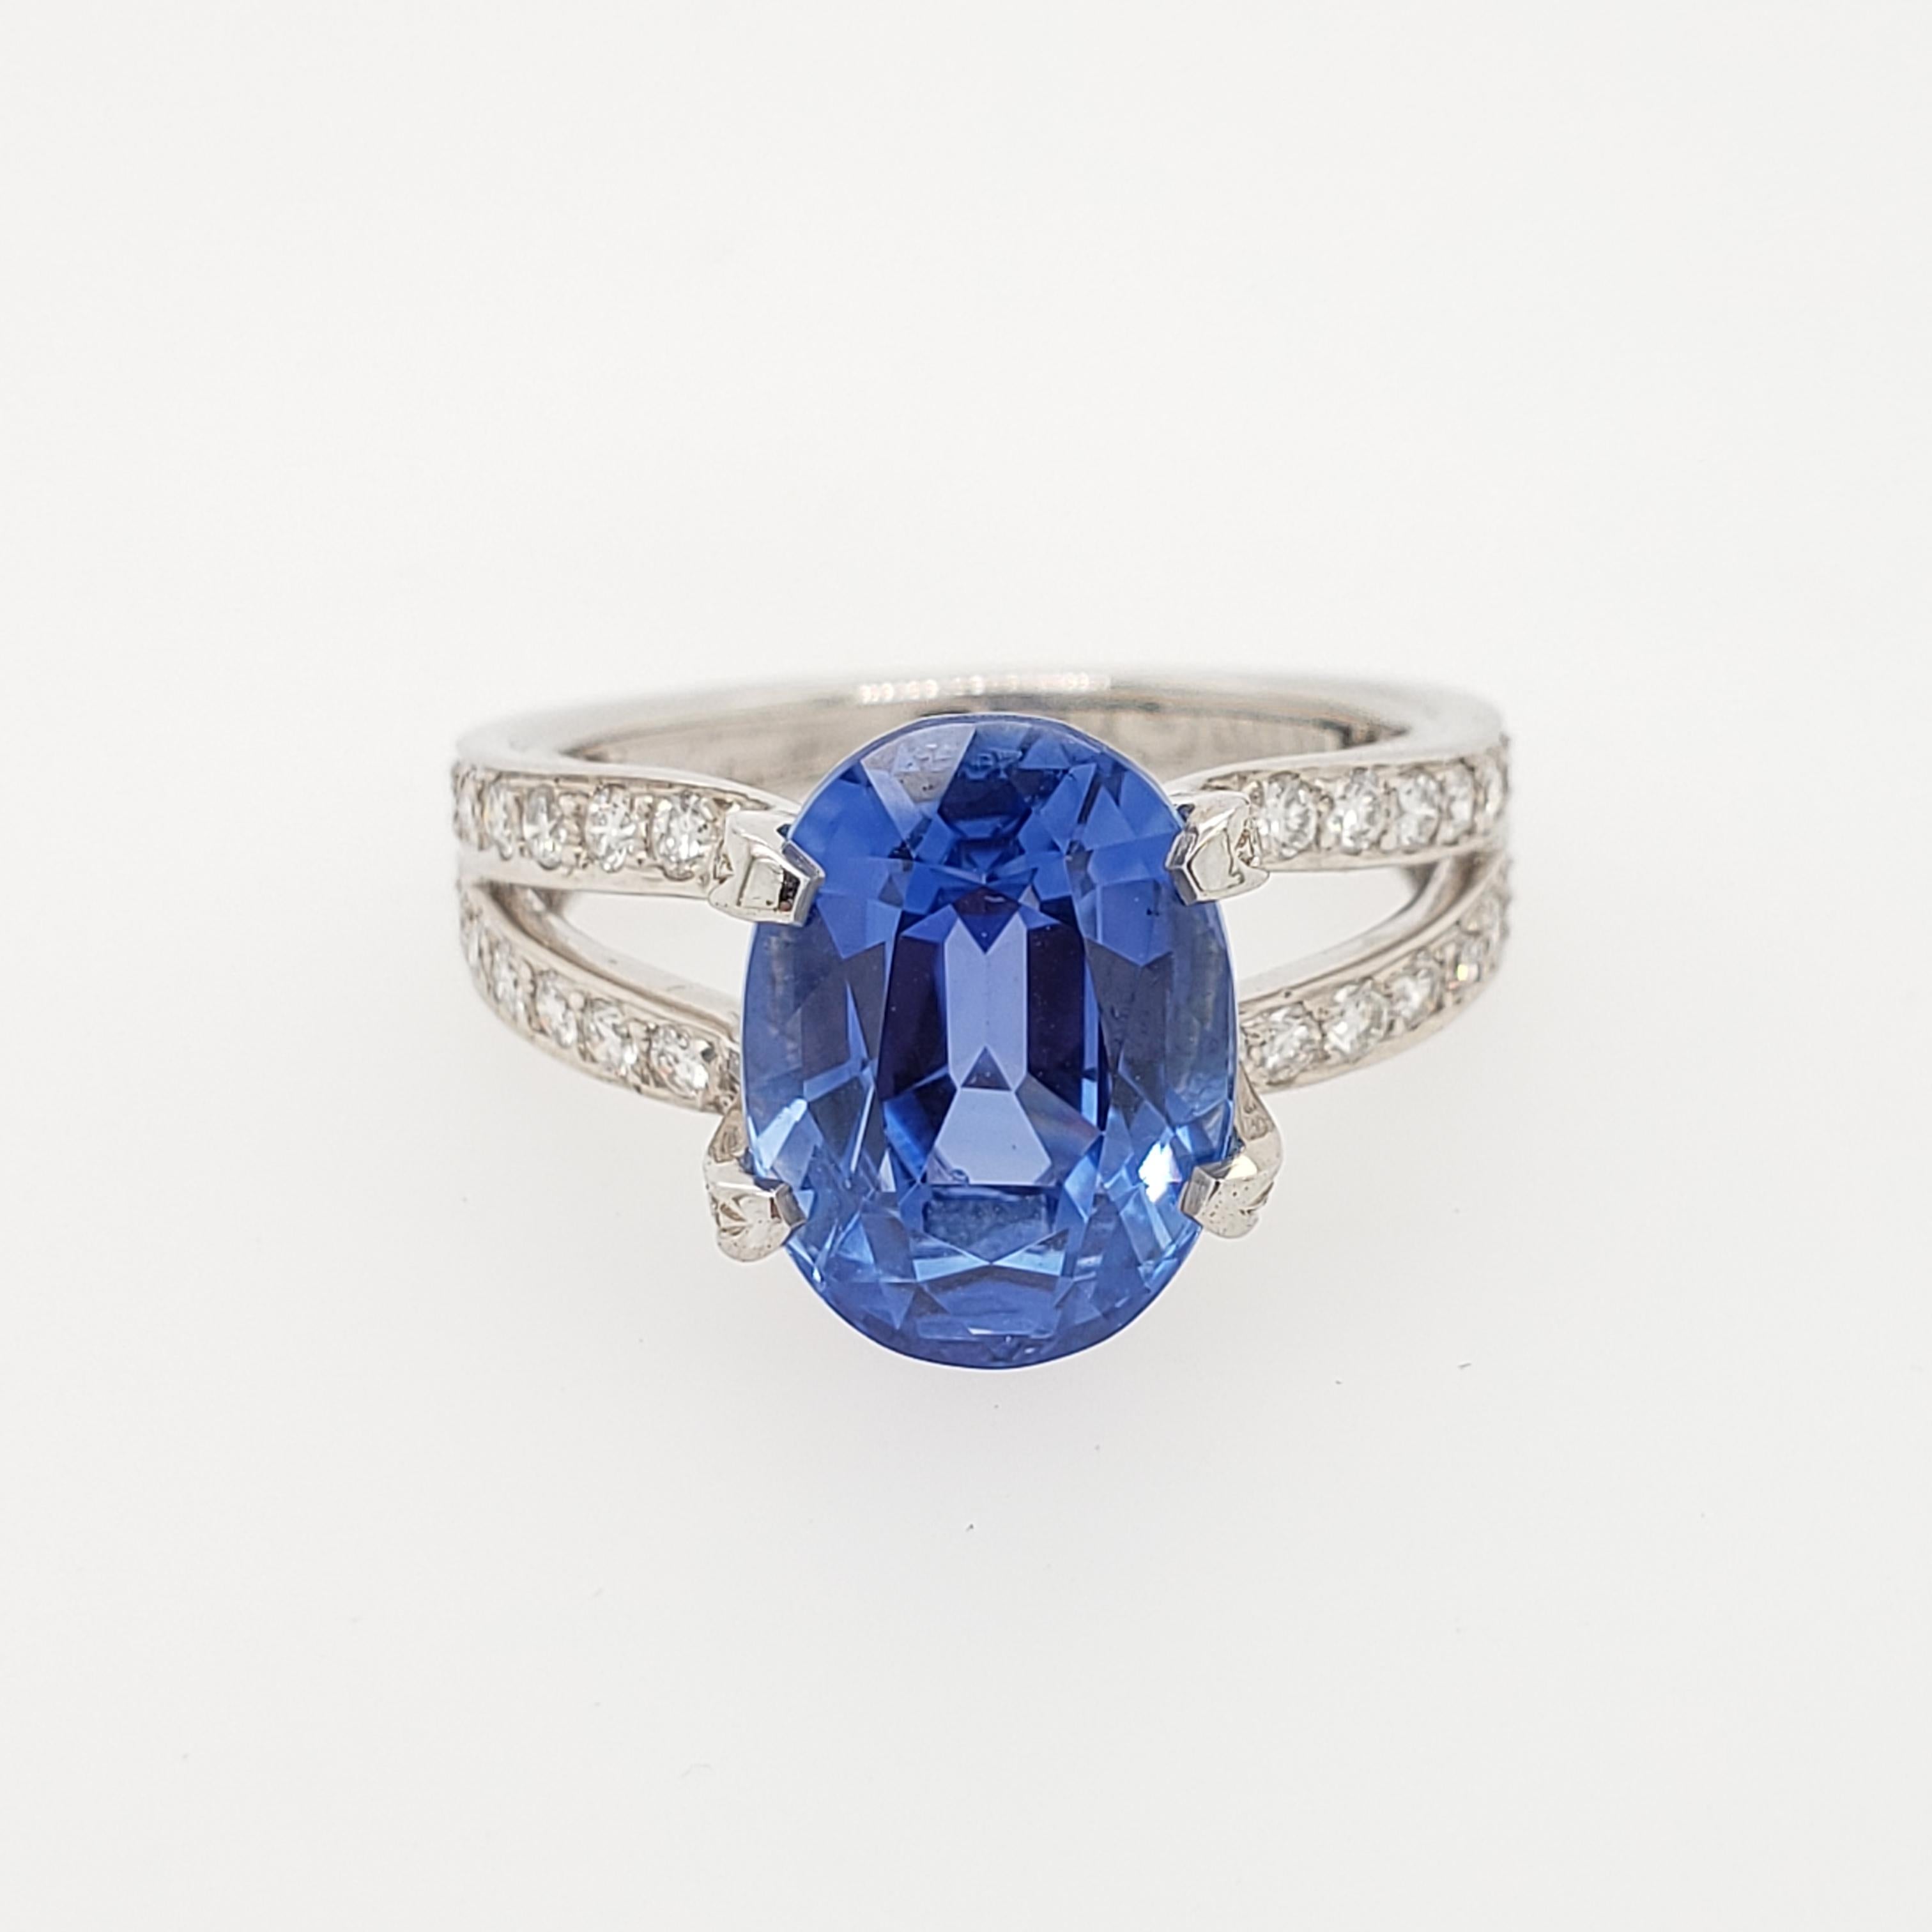 VINTAGE Tiffany Platinum ring featuring Oval  Ceylon sapphire weighing  6.76 ct,  not heated, AGL certificate, CS1074739 (4/26/16). Split shank set with 58 round diamonds weighing approximately 0.80 ct . Size
6 1/4. 6.92 gr.